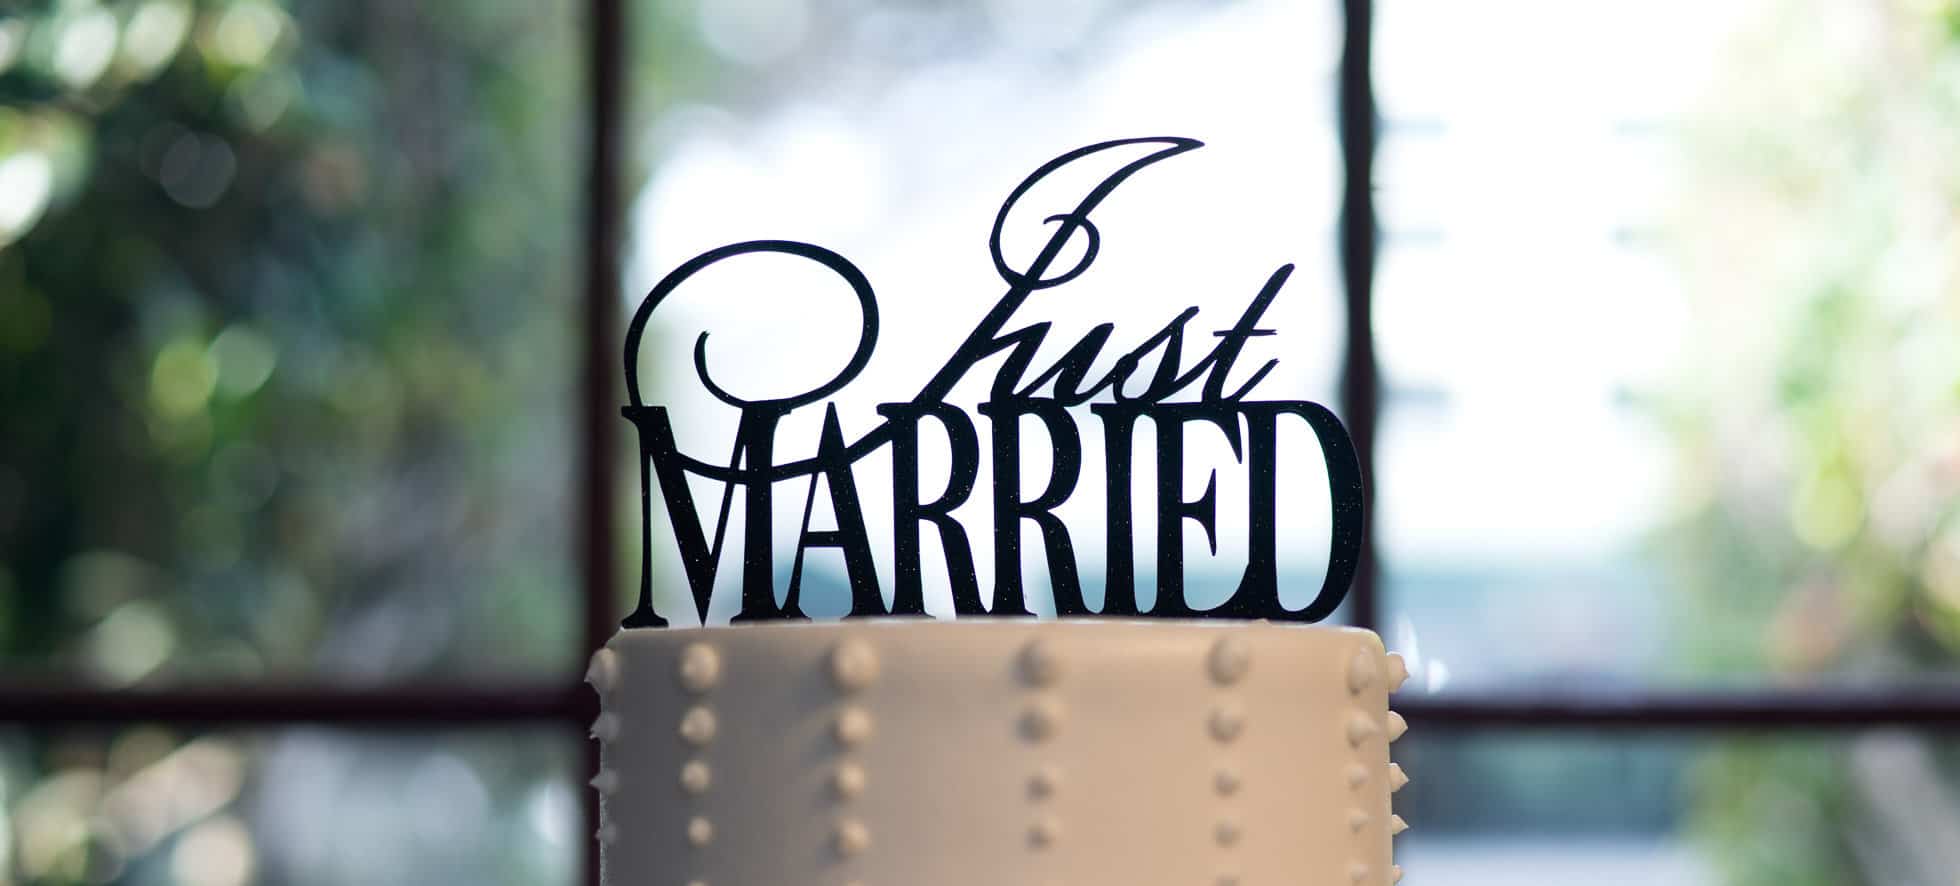 A white wedding cake with a black metal topper that says "Just Married".